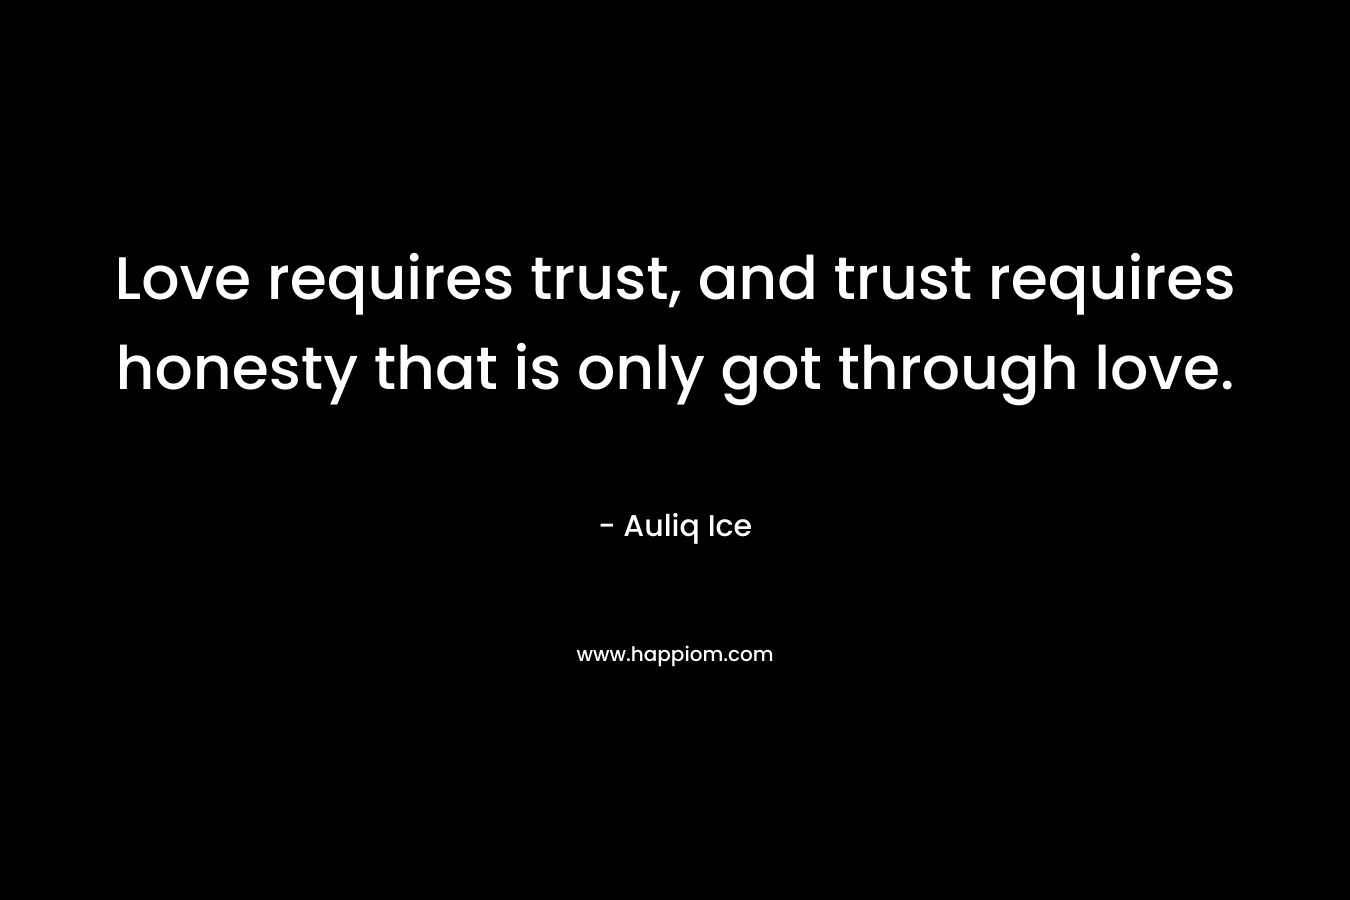 Love requires trust, and trust requires honesty that is only got through love.